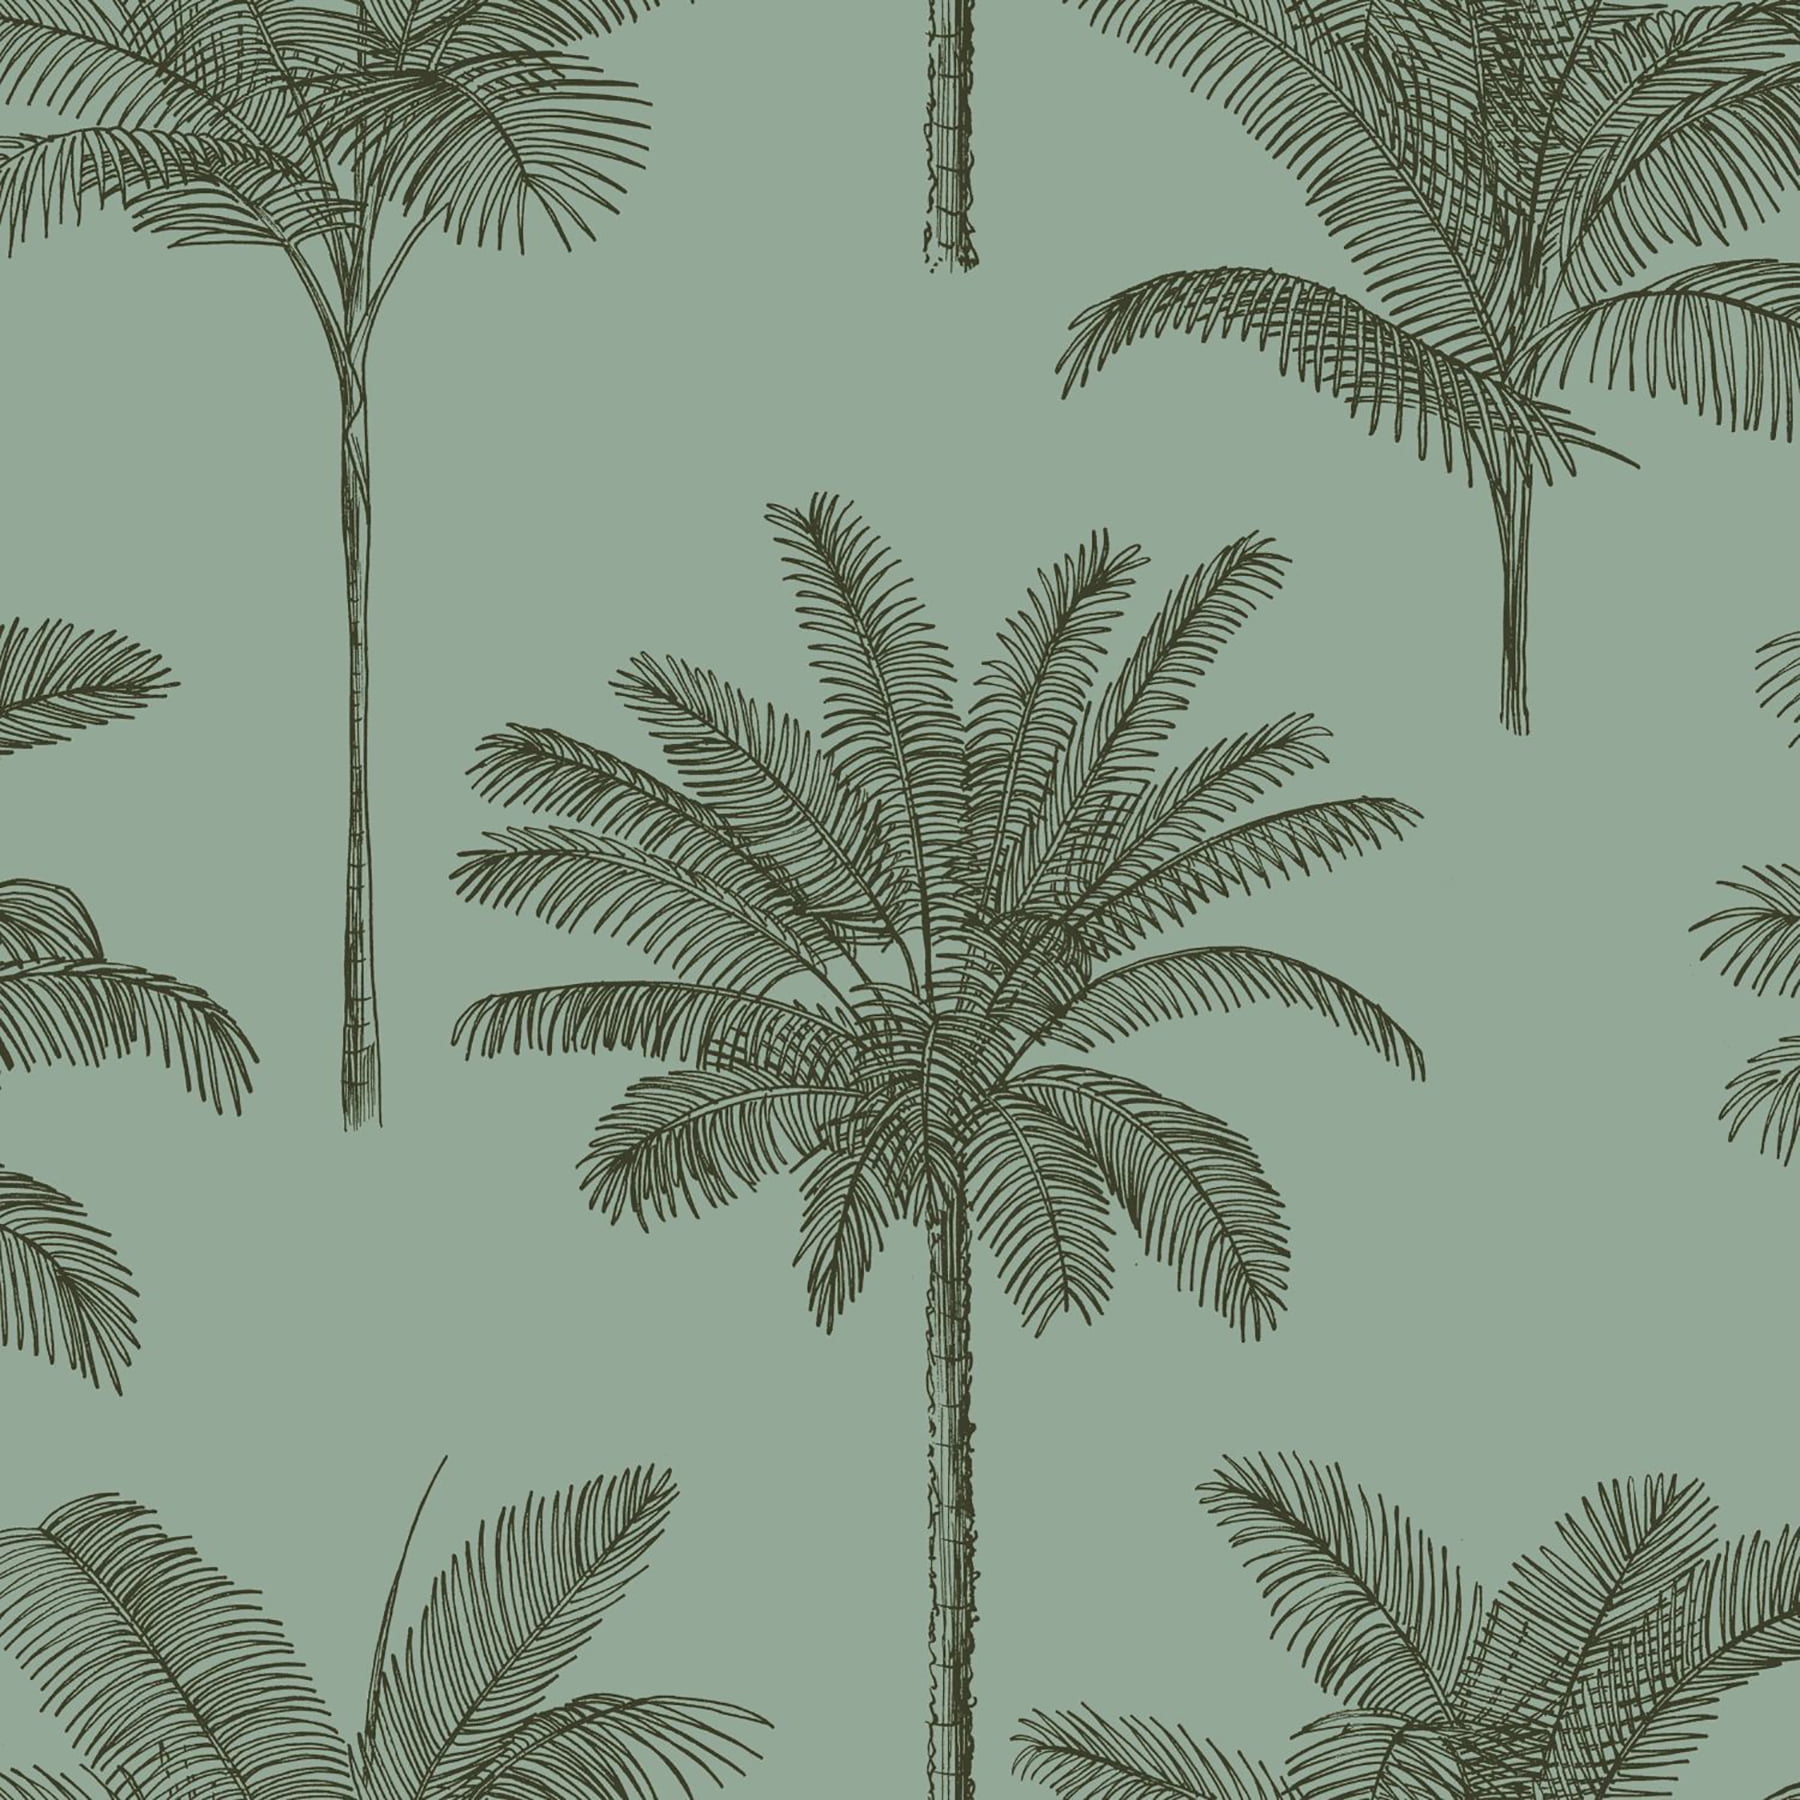 WALLPAPER BORDER TROPICAL PALM TREE BUILDINGS NEW ARRIVAL PLANTS TREES 